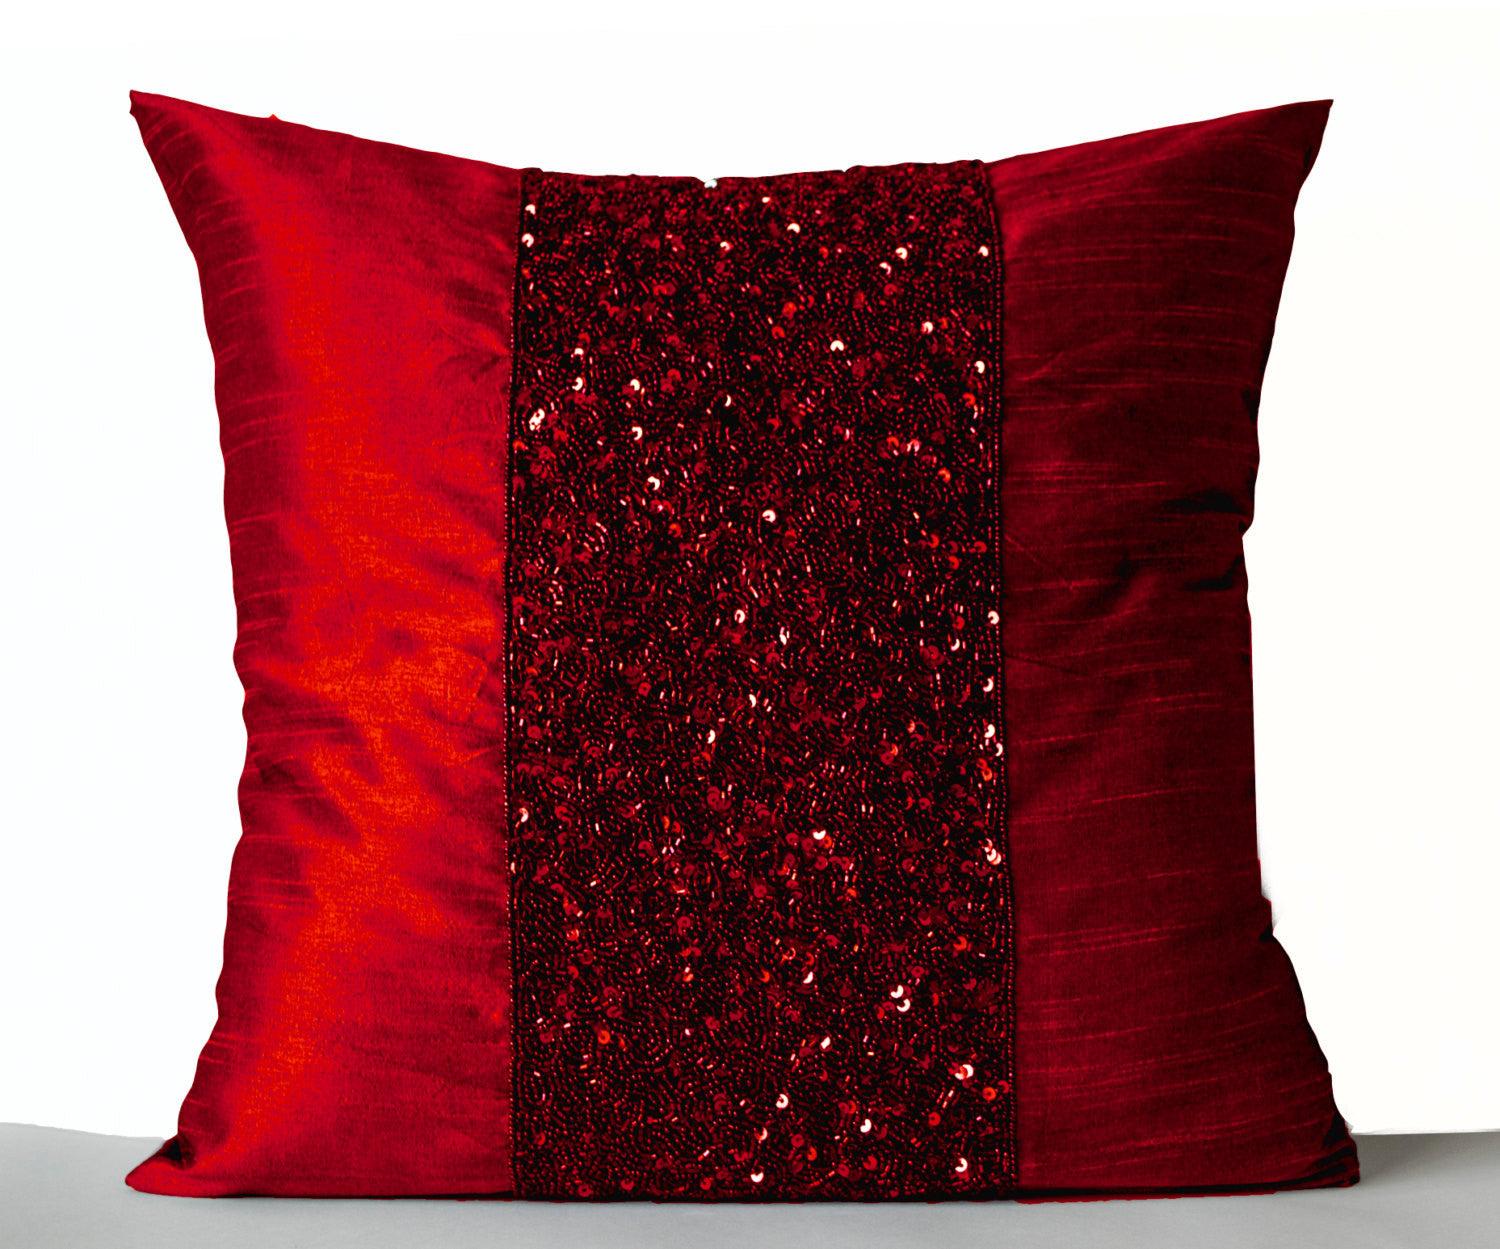 Handmade red silk pillow covers with beads and embroidery